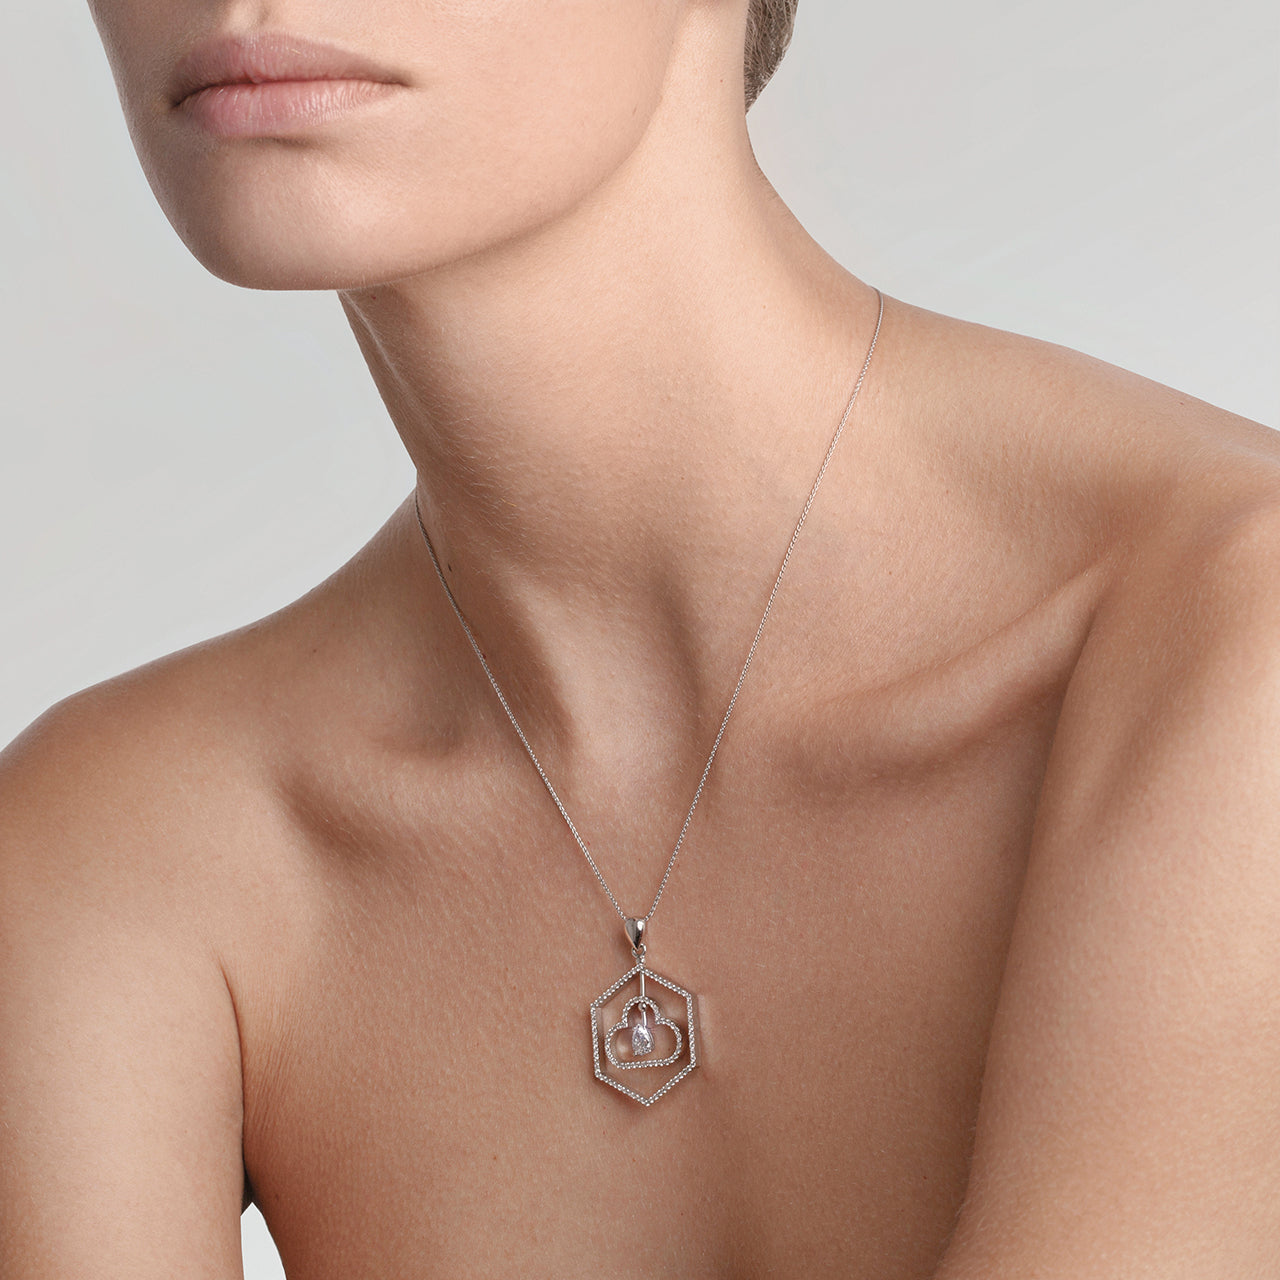 Conceptual golden pendant representing 3 states of water on the model